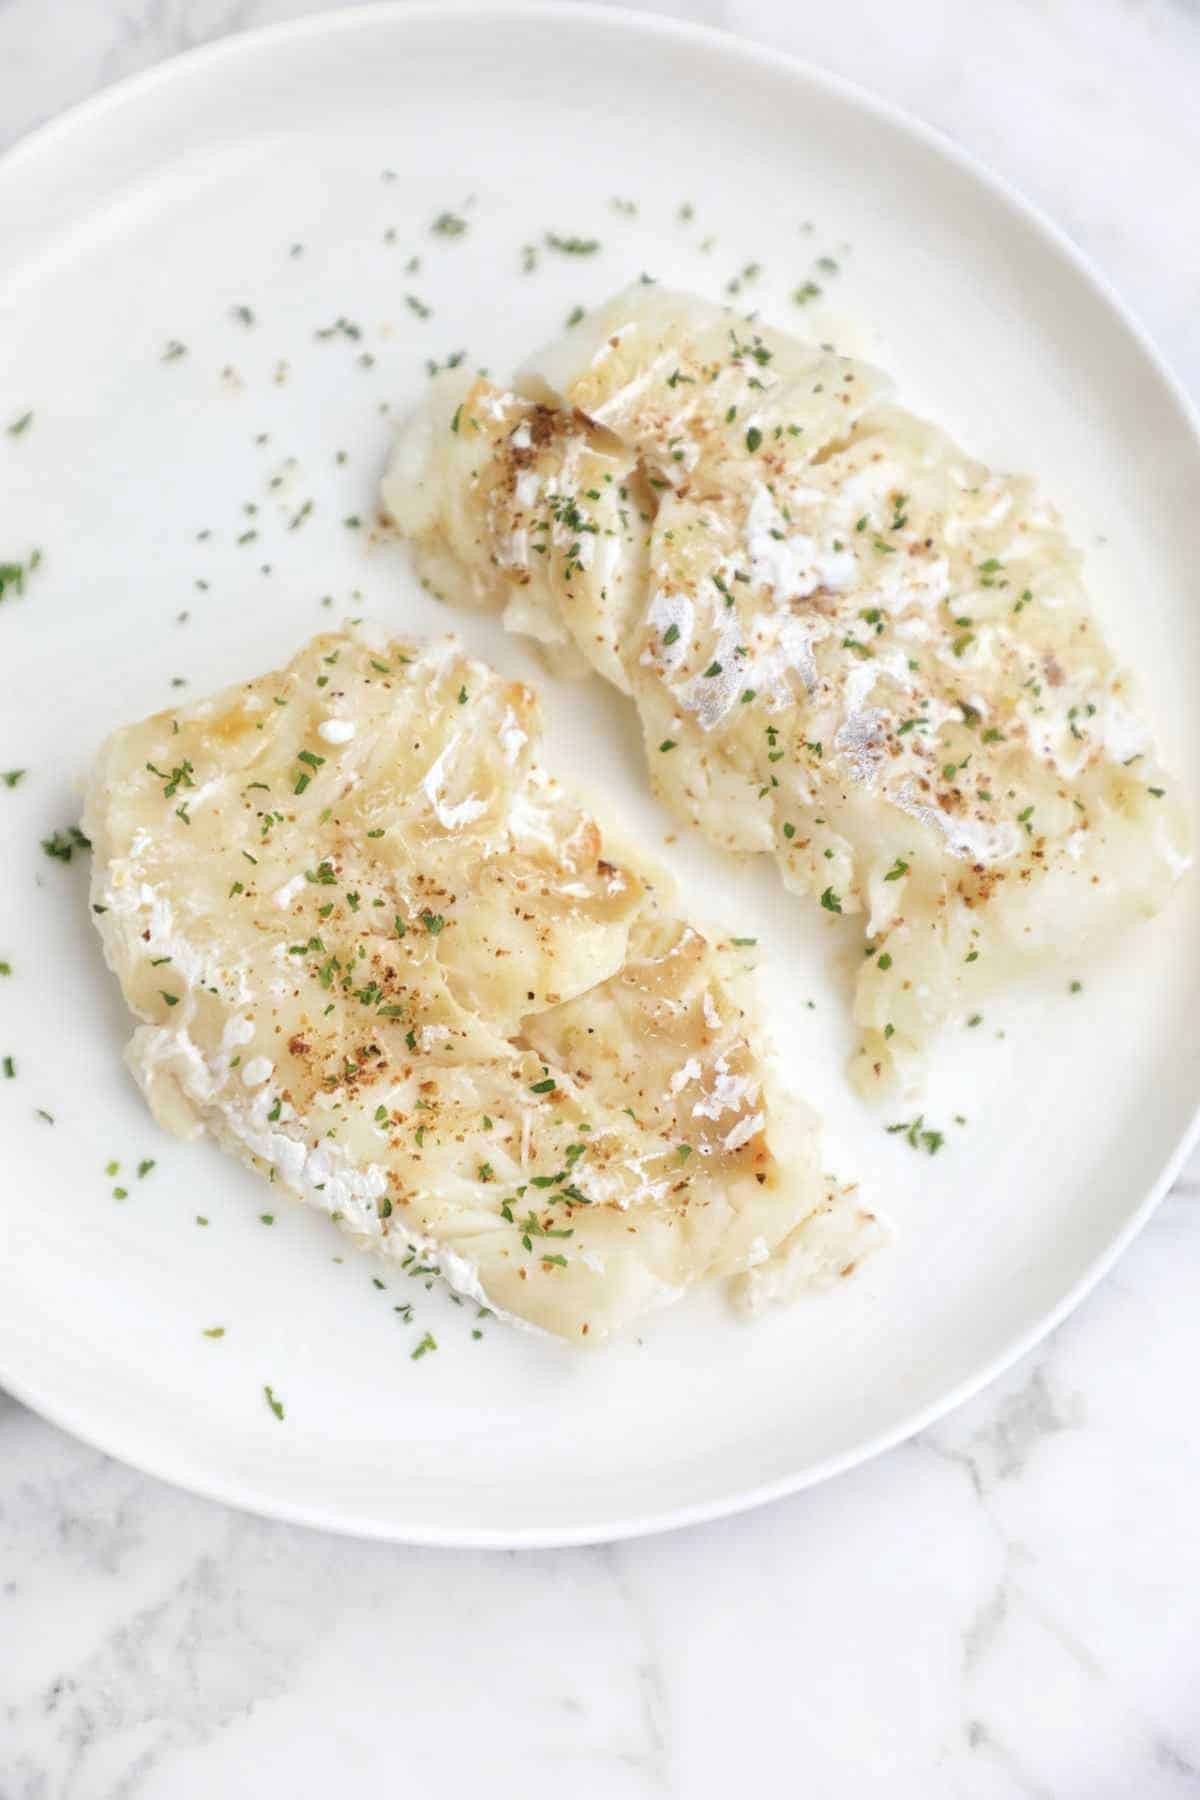 How Long Does Cod Take to Cook: Cooking Times for White Fish